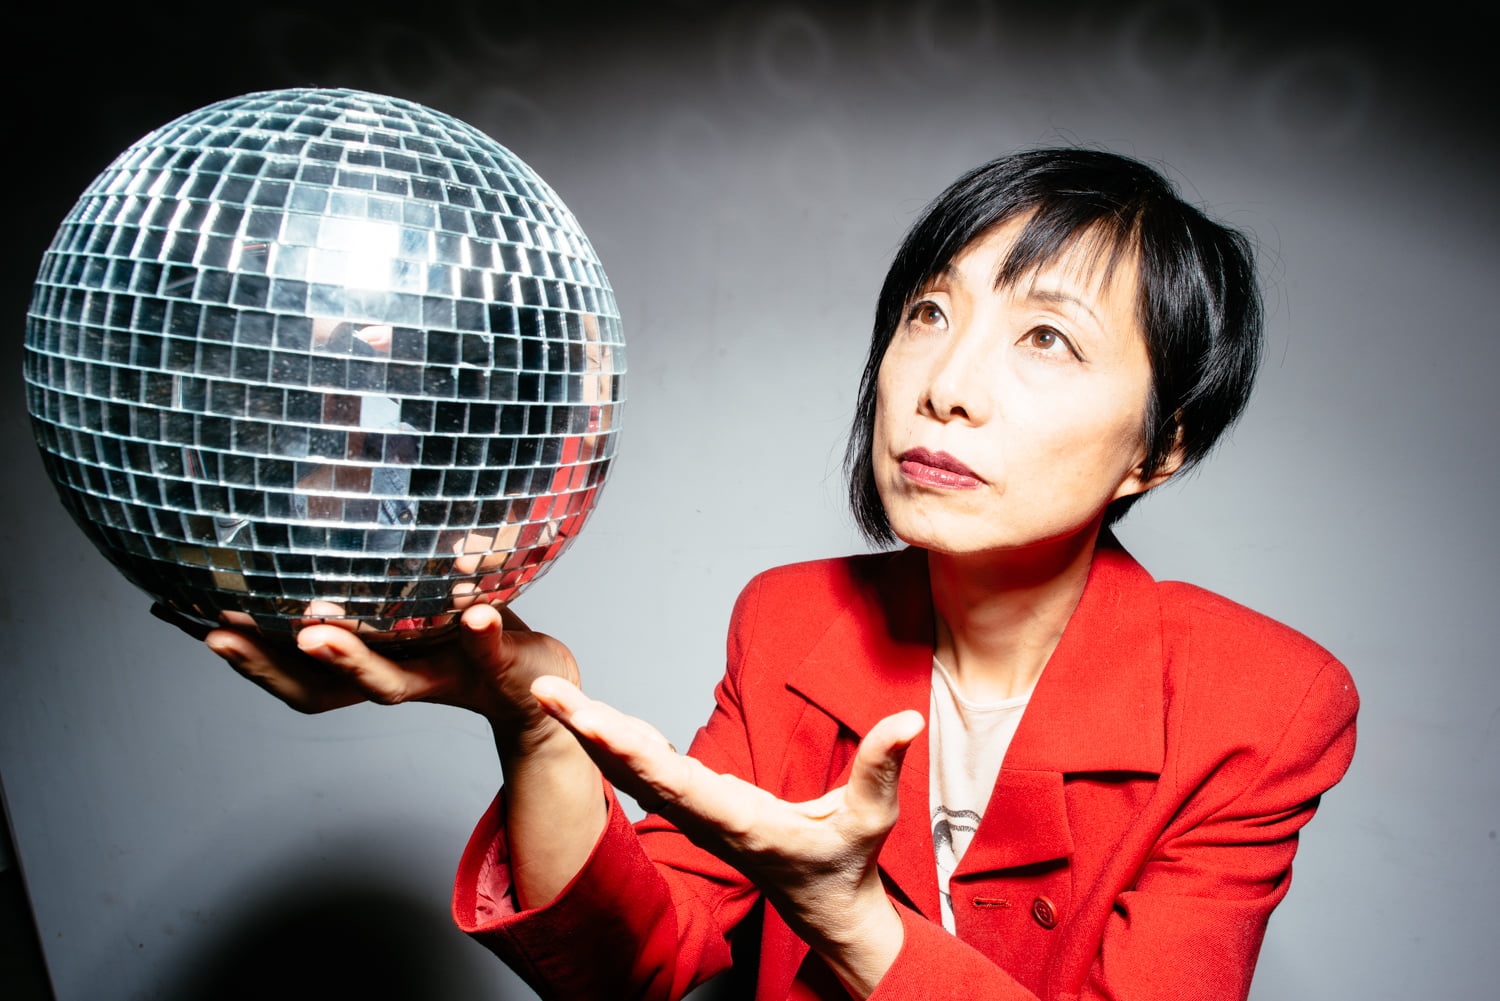 A Japanese American woman with short black hair reaches out to hold a disco ball in one hand. She wears a bright red jacket and looks toward the disco ball.